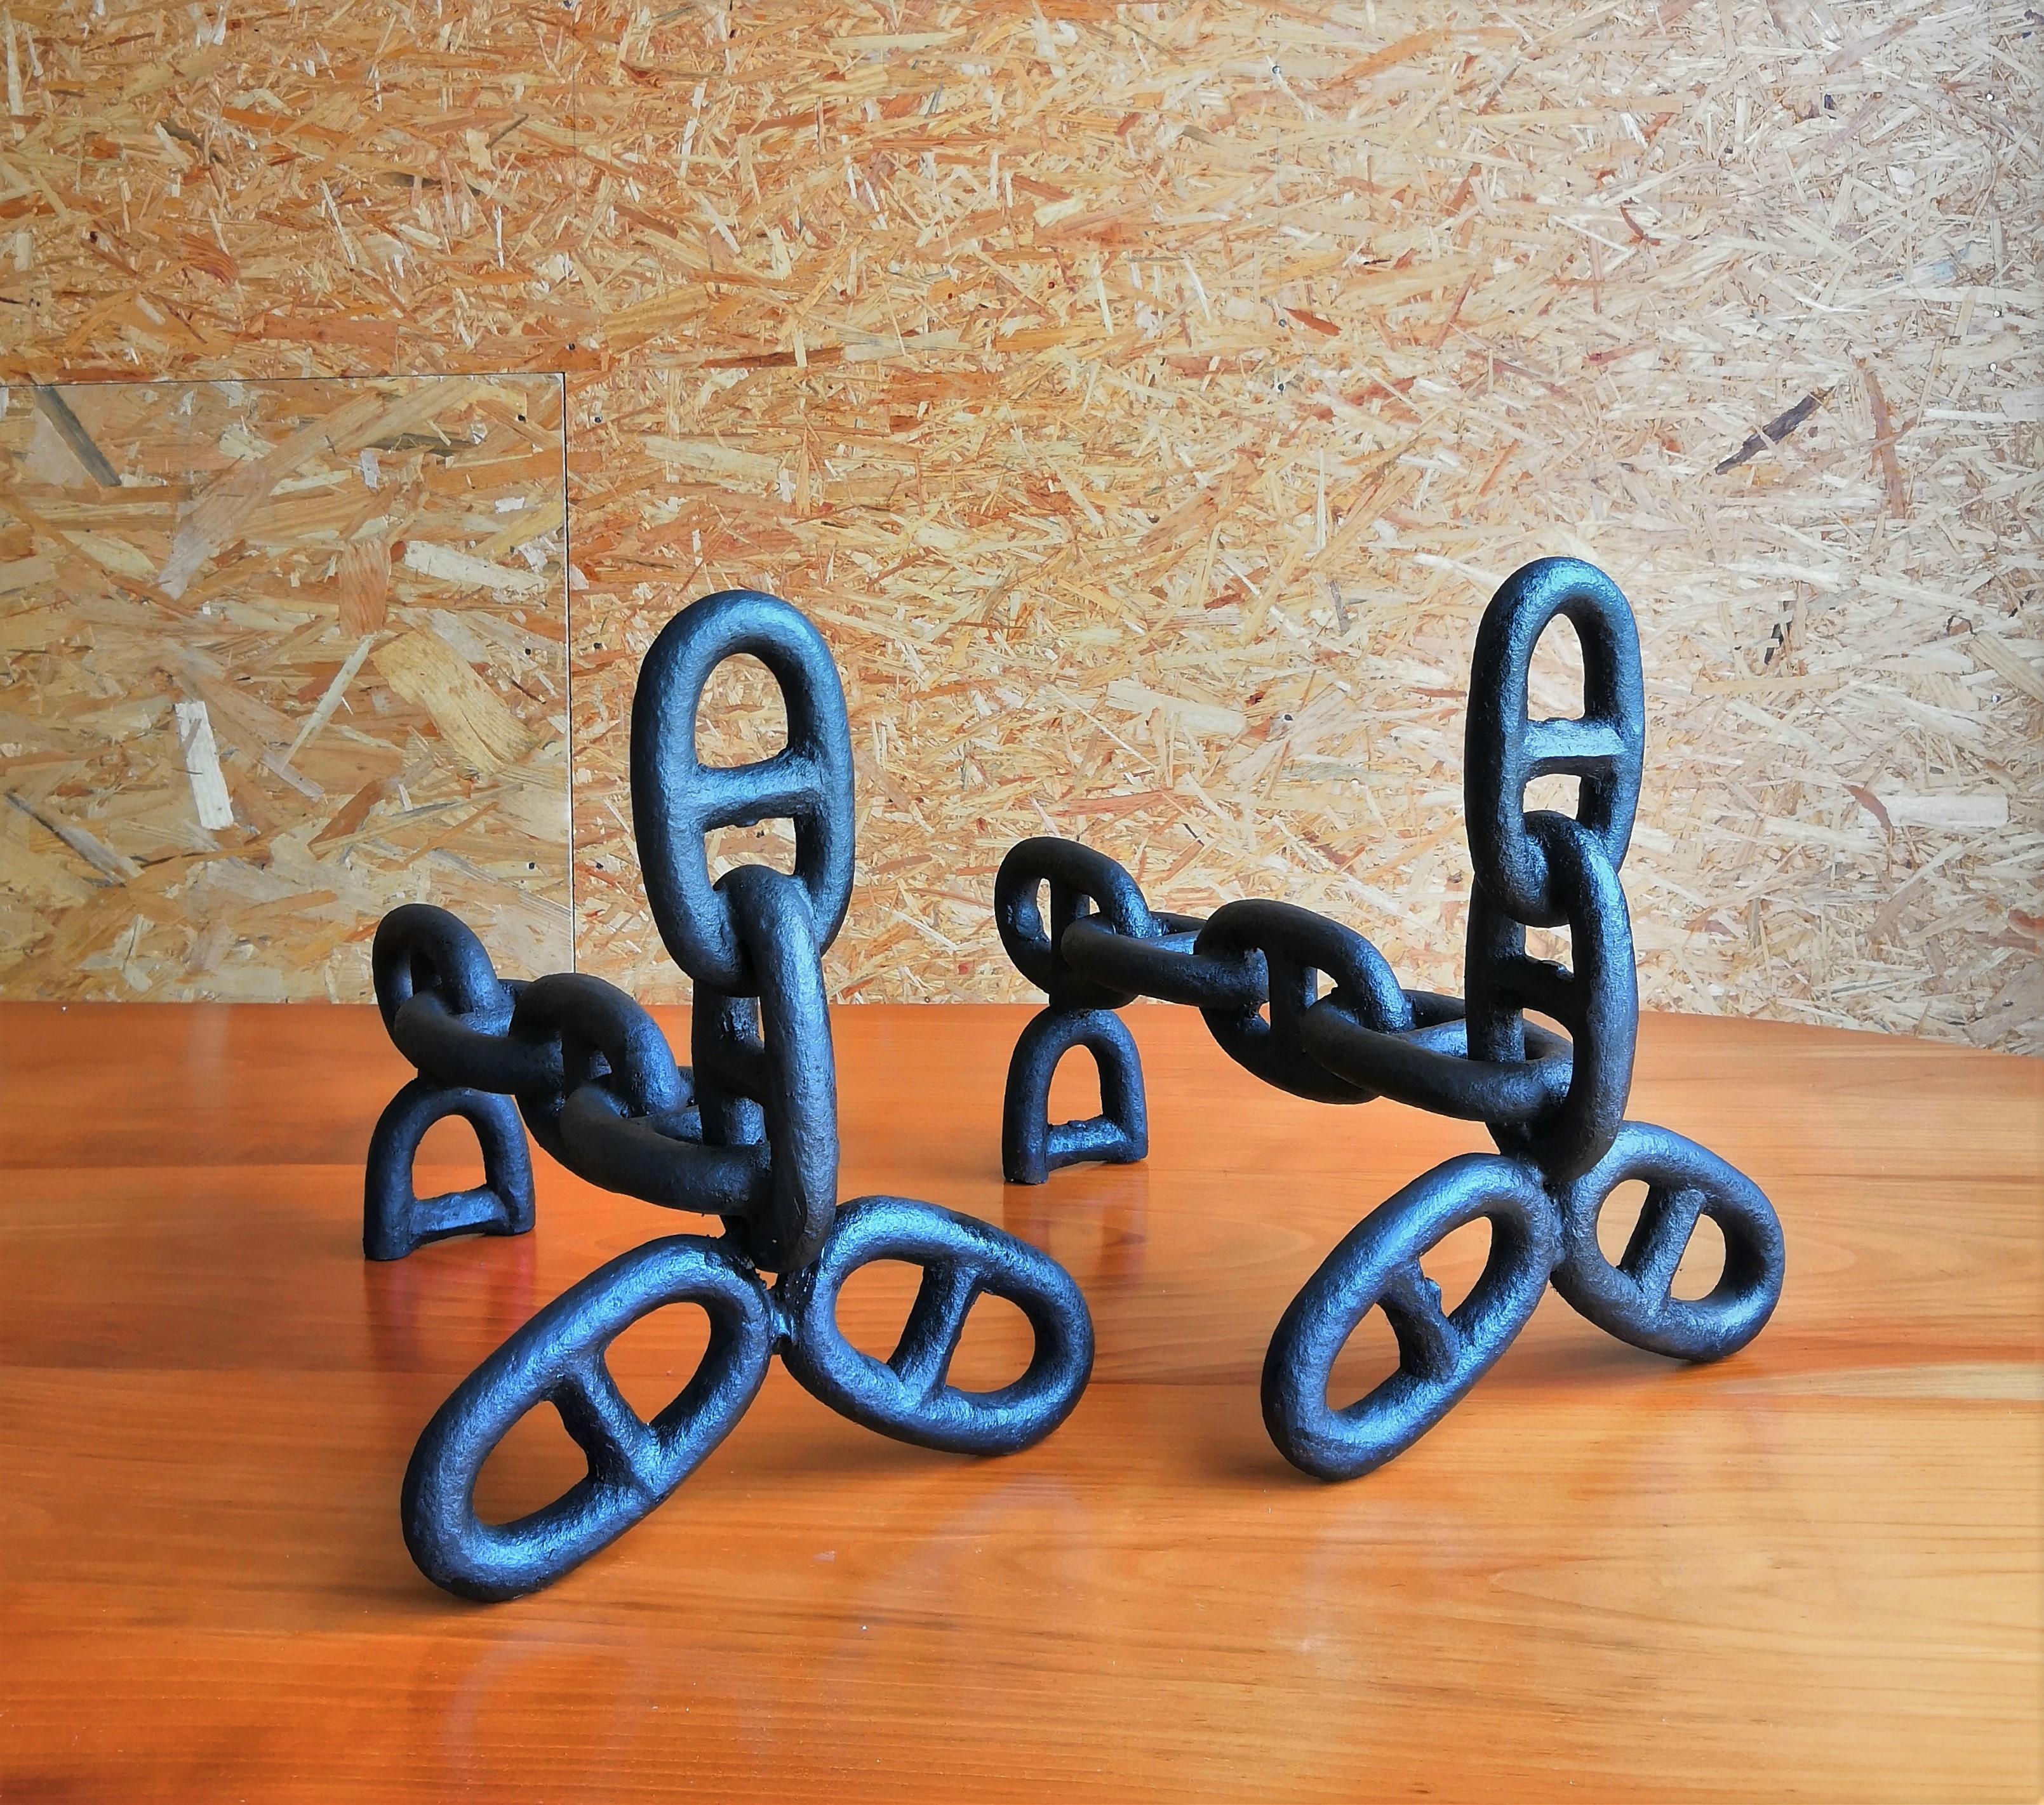 These unique solid cast iron andirons were made of a marine anchor chain
They are returnable to either Paris, France or convenient NYC location.
 